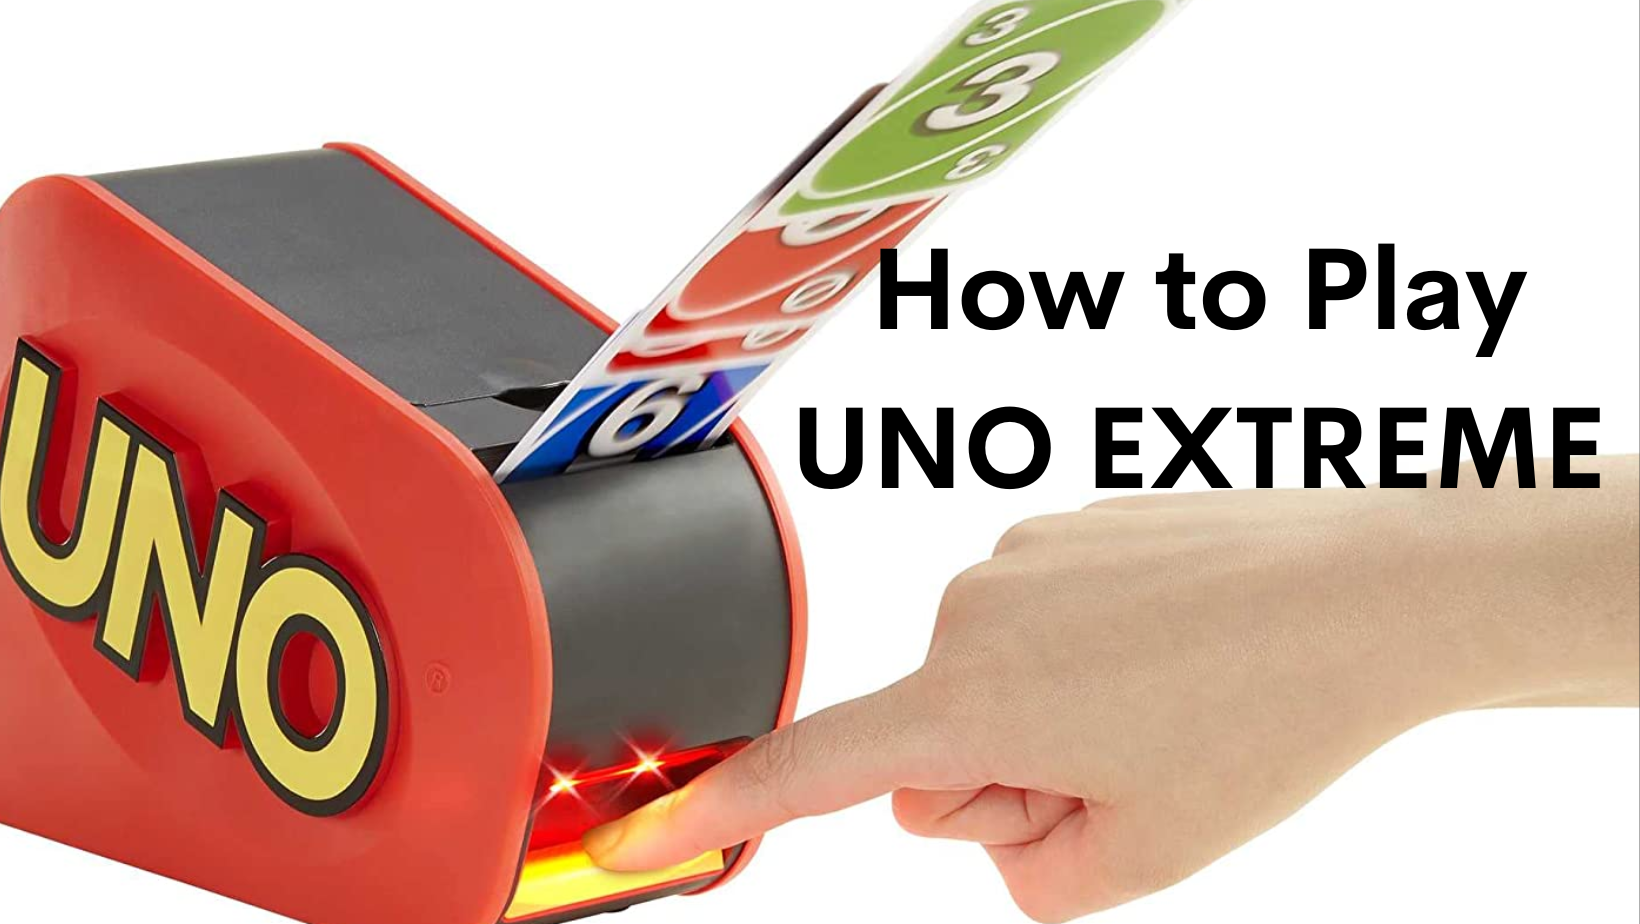 Rules for Uno Extreme